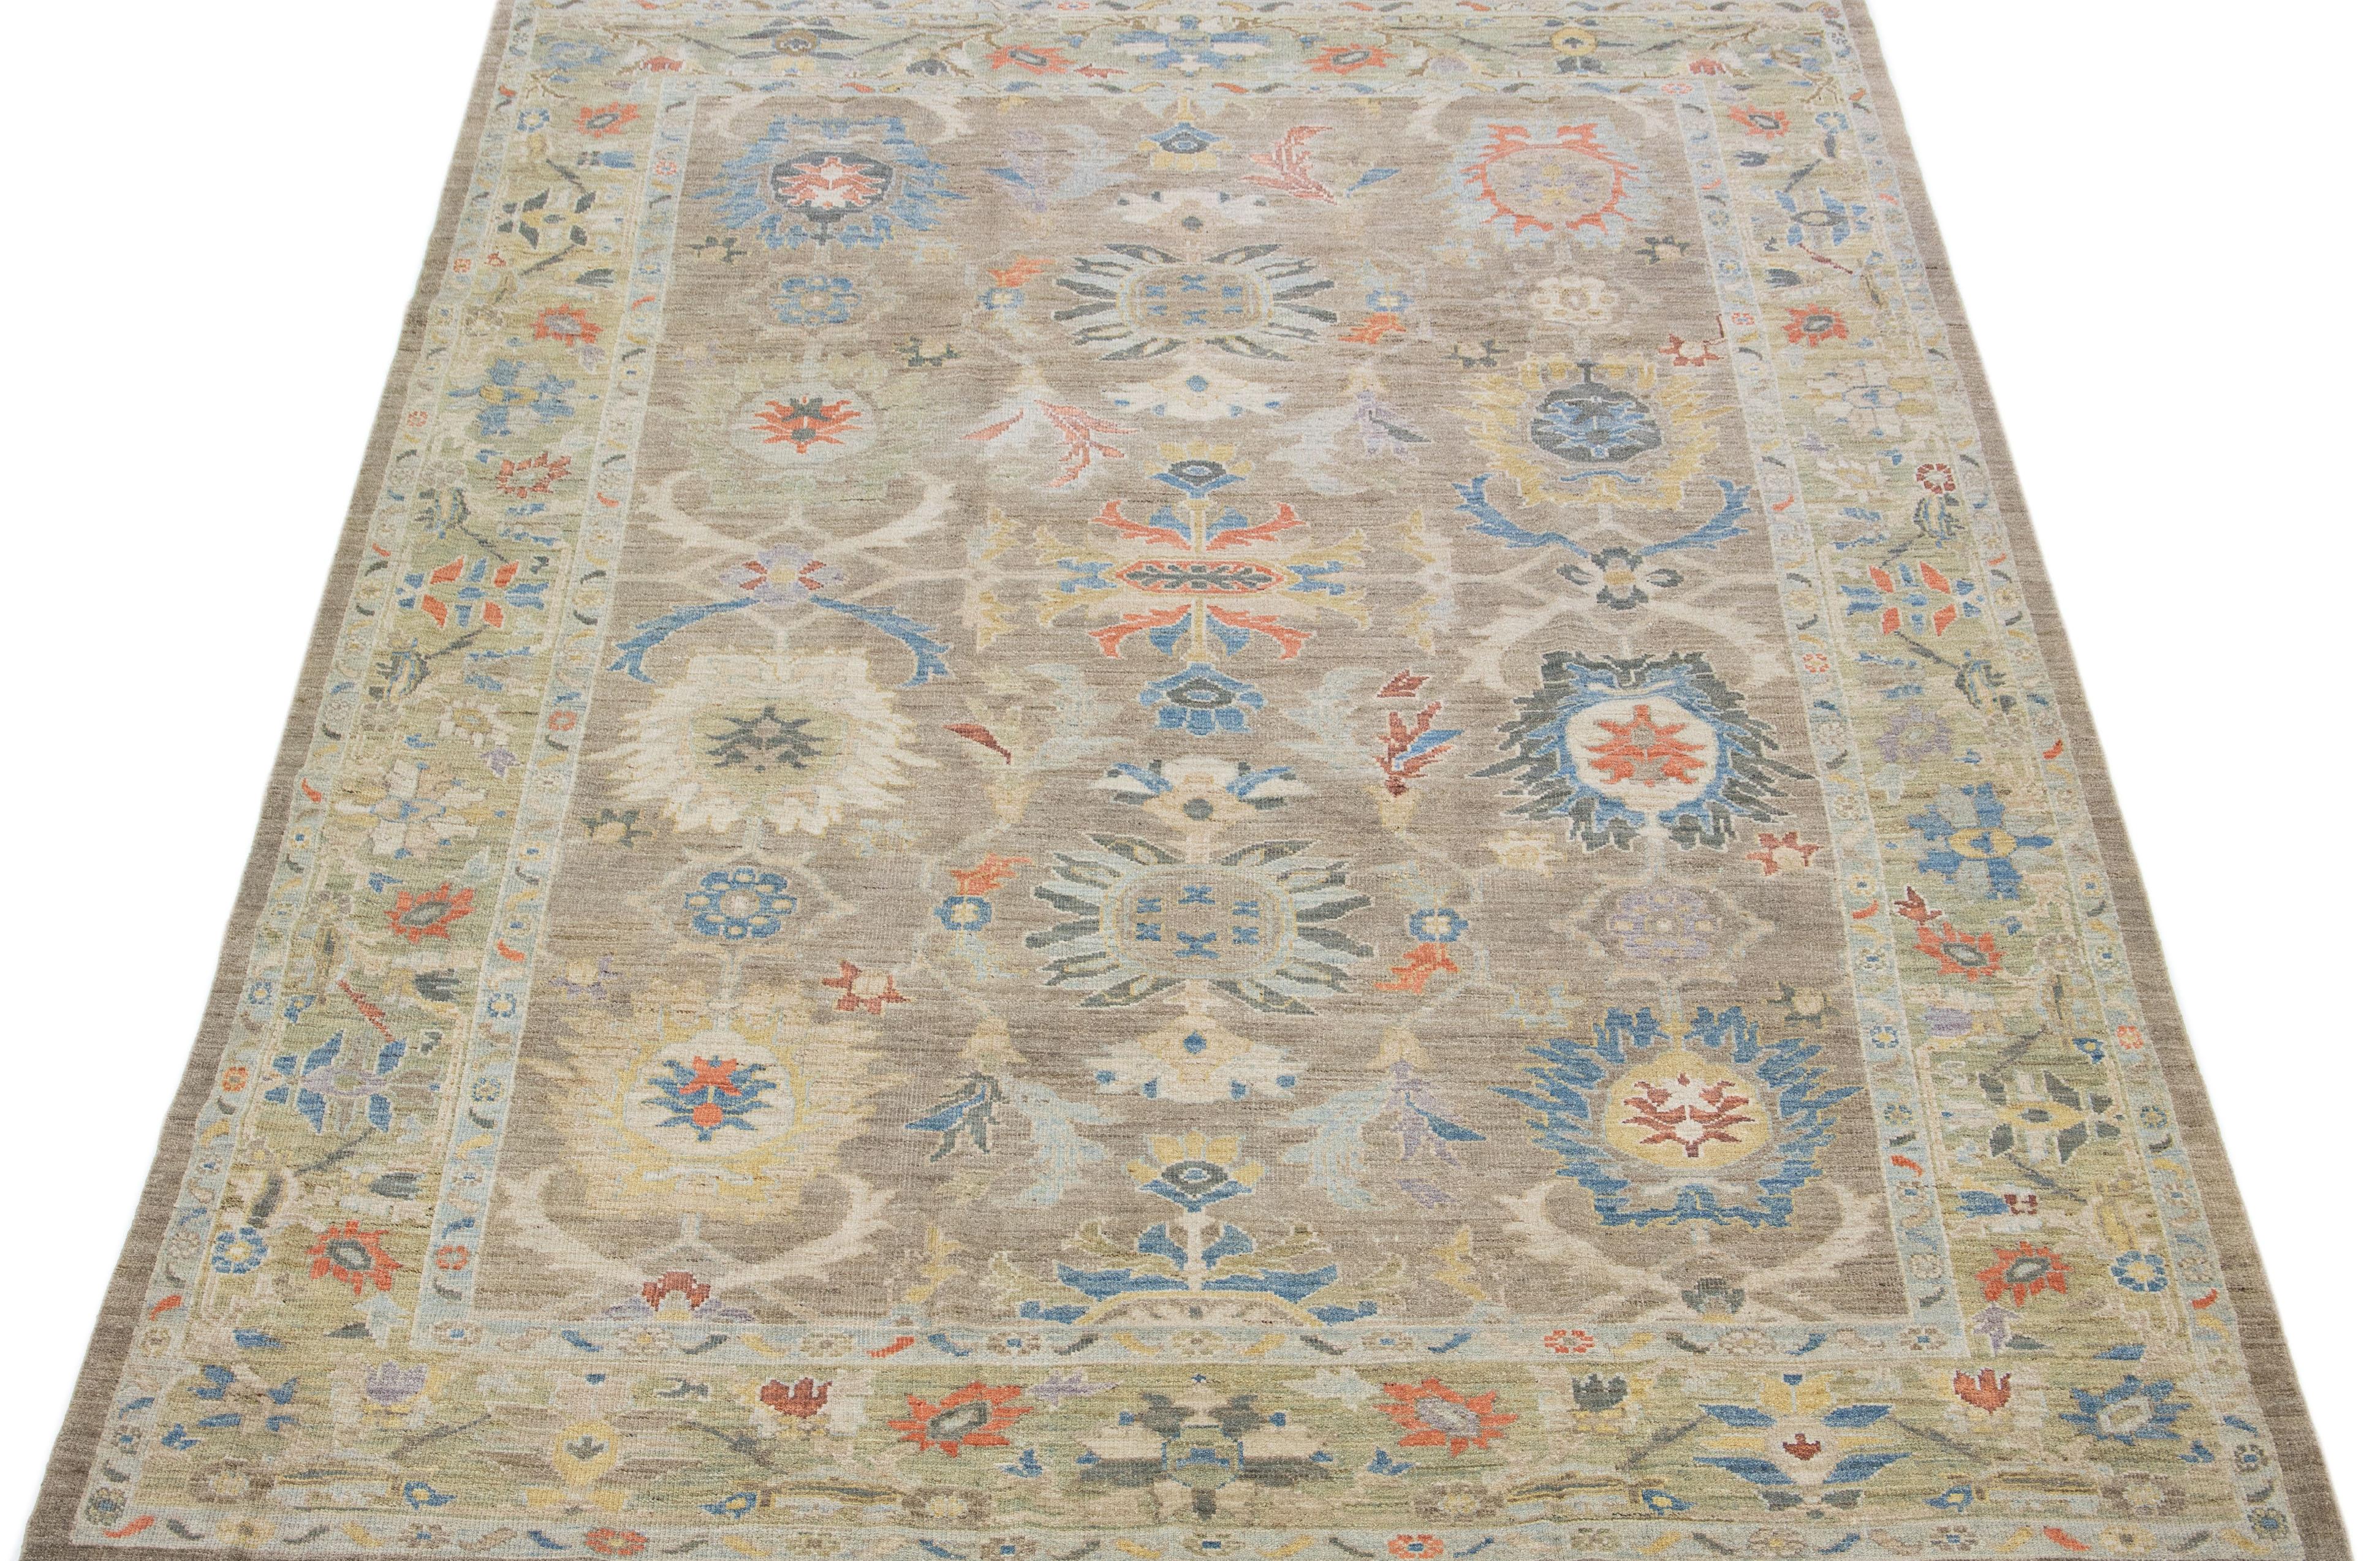 Beautiful modern Sultanabad hand-knotted wool rug with a light brown color field. This rug has a green-designed frame with multicolor accents in a gorgeous all-over floral design.

This rug measures: 8'9